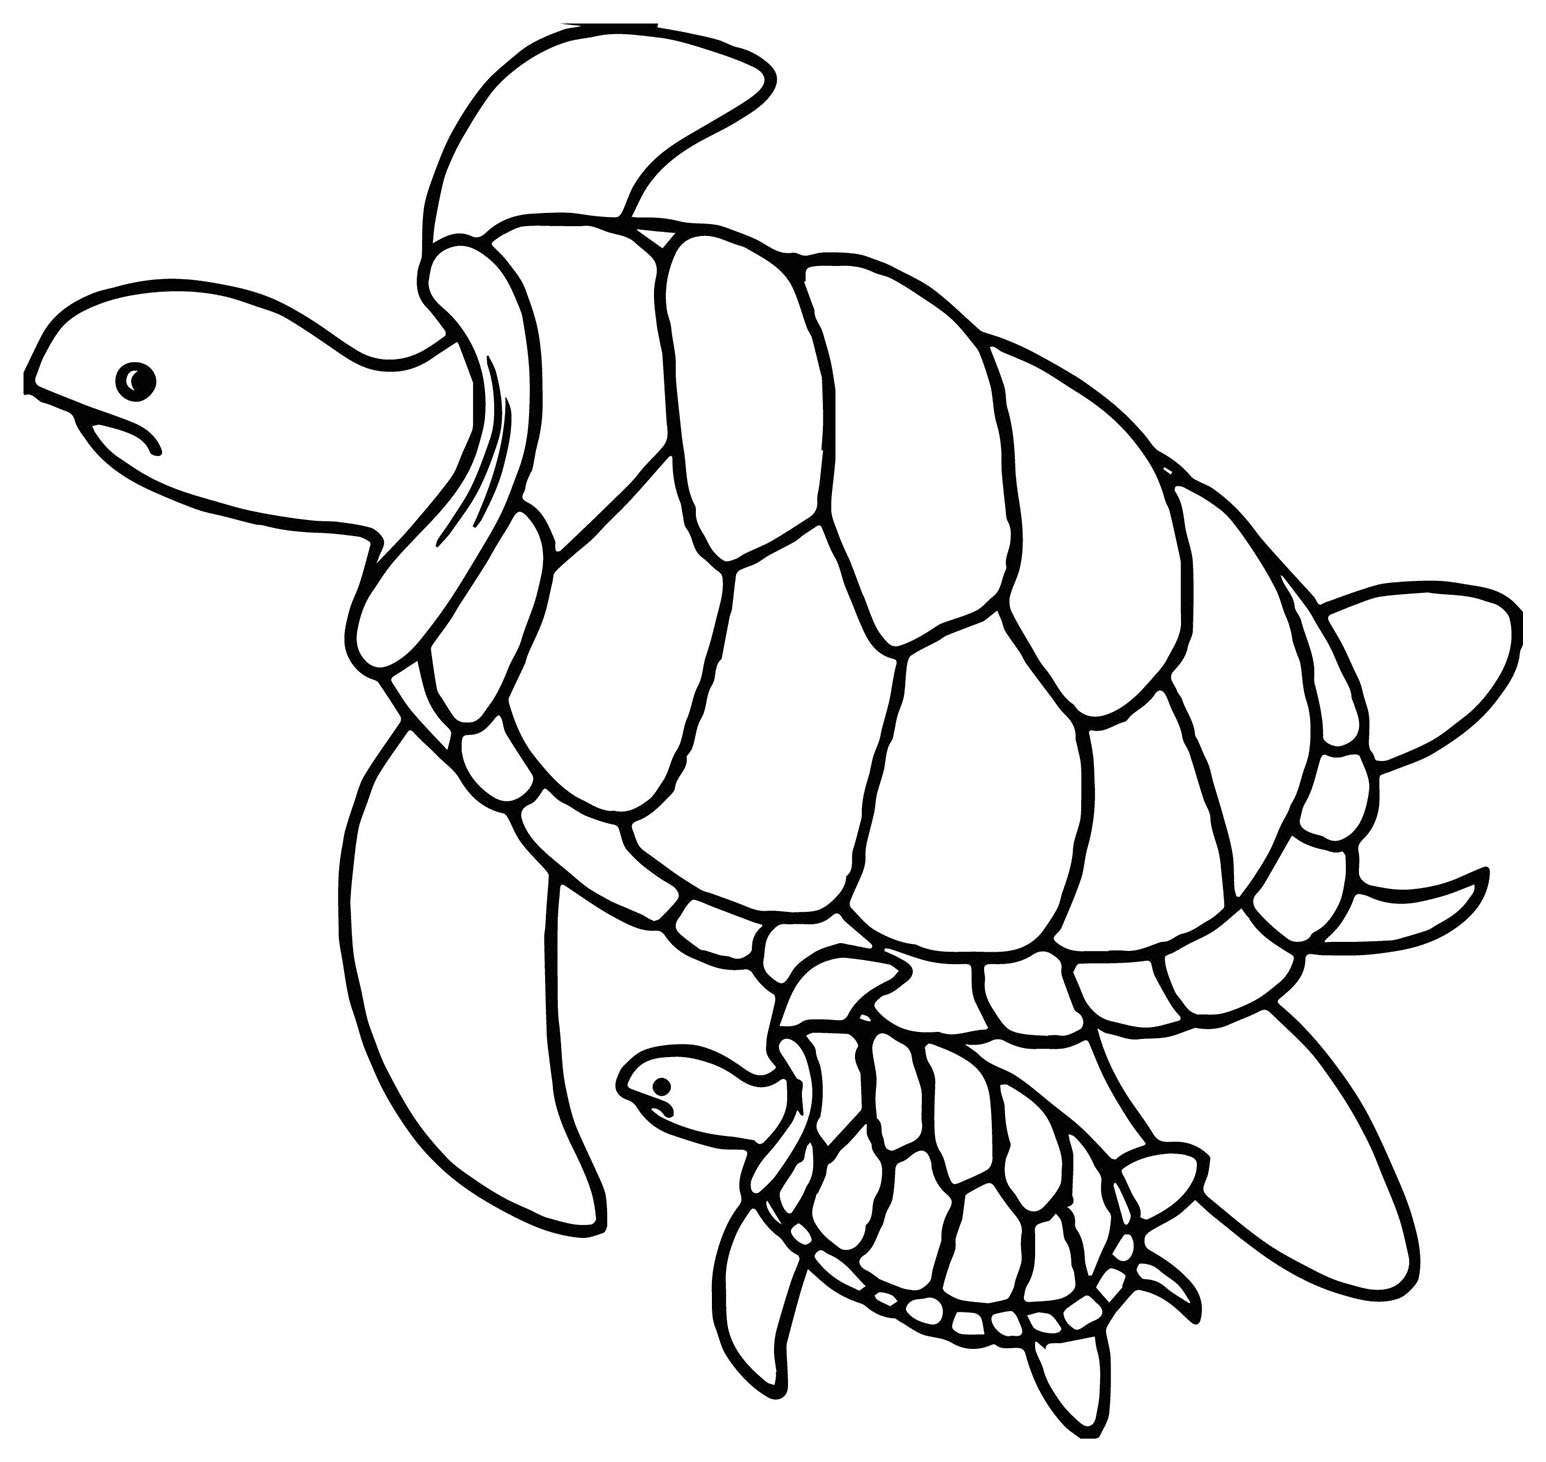  Turtles  free to color  for children Turtles  Kids Coloring  